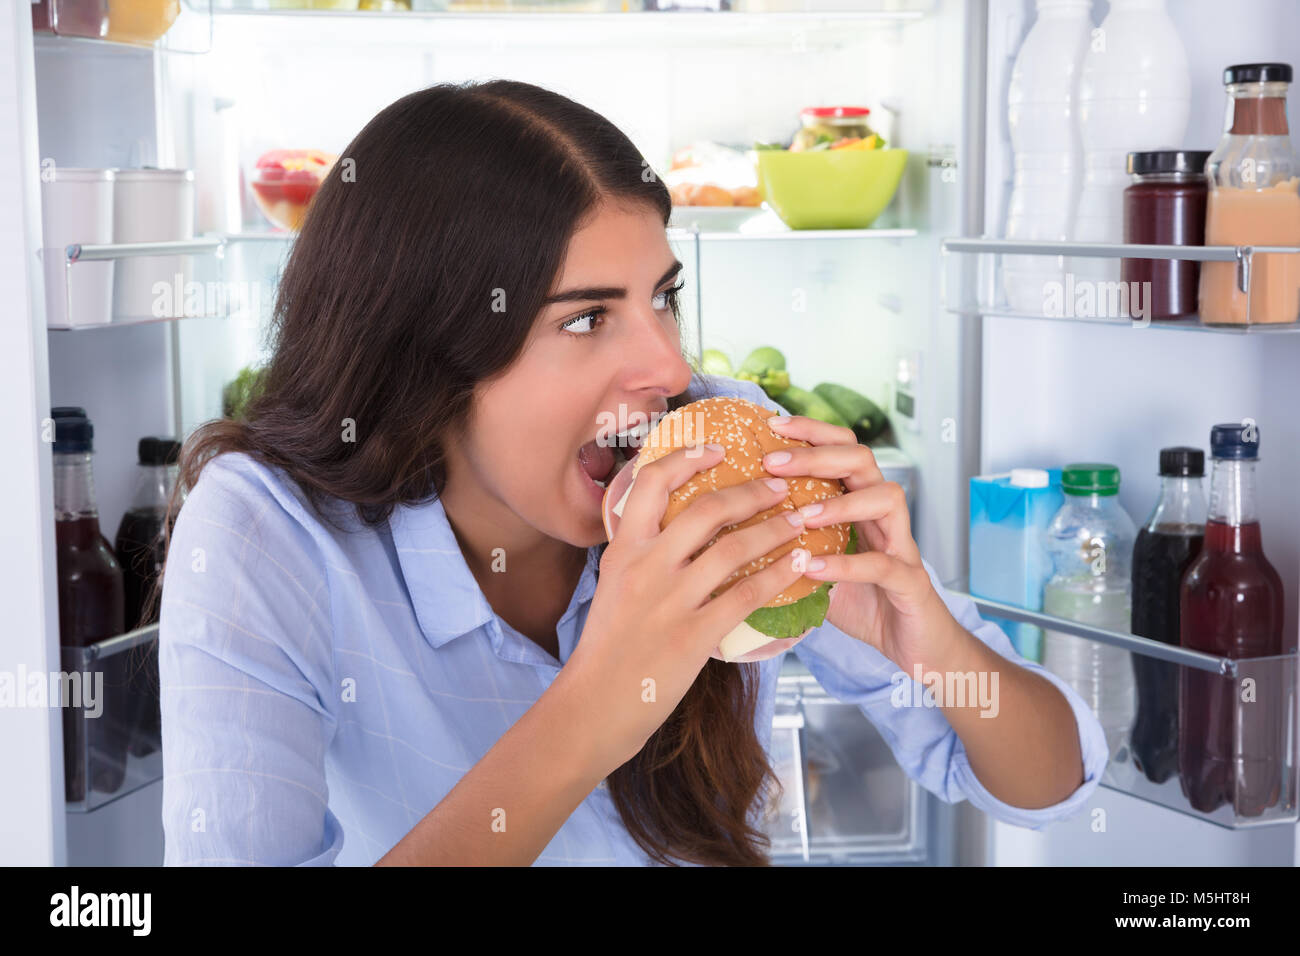 Portrait Of A Young Happy Woman Eating Burger Stock Photo